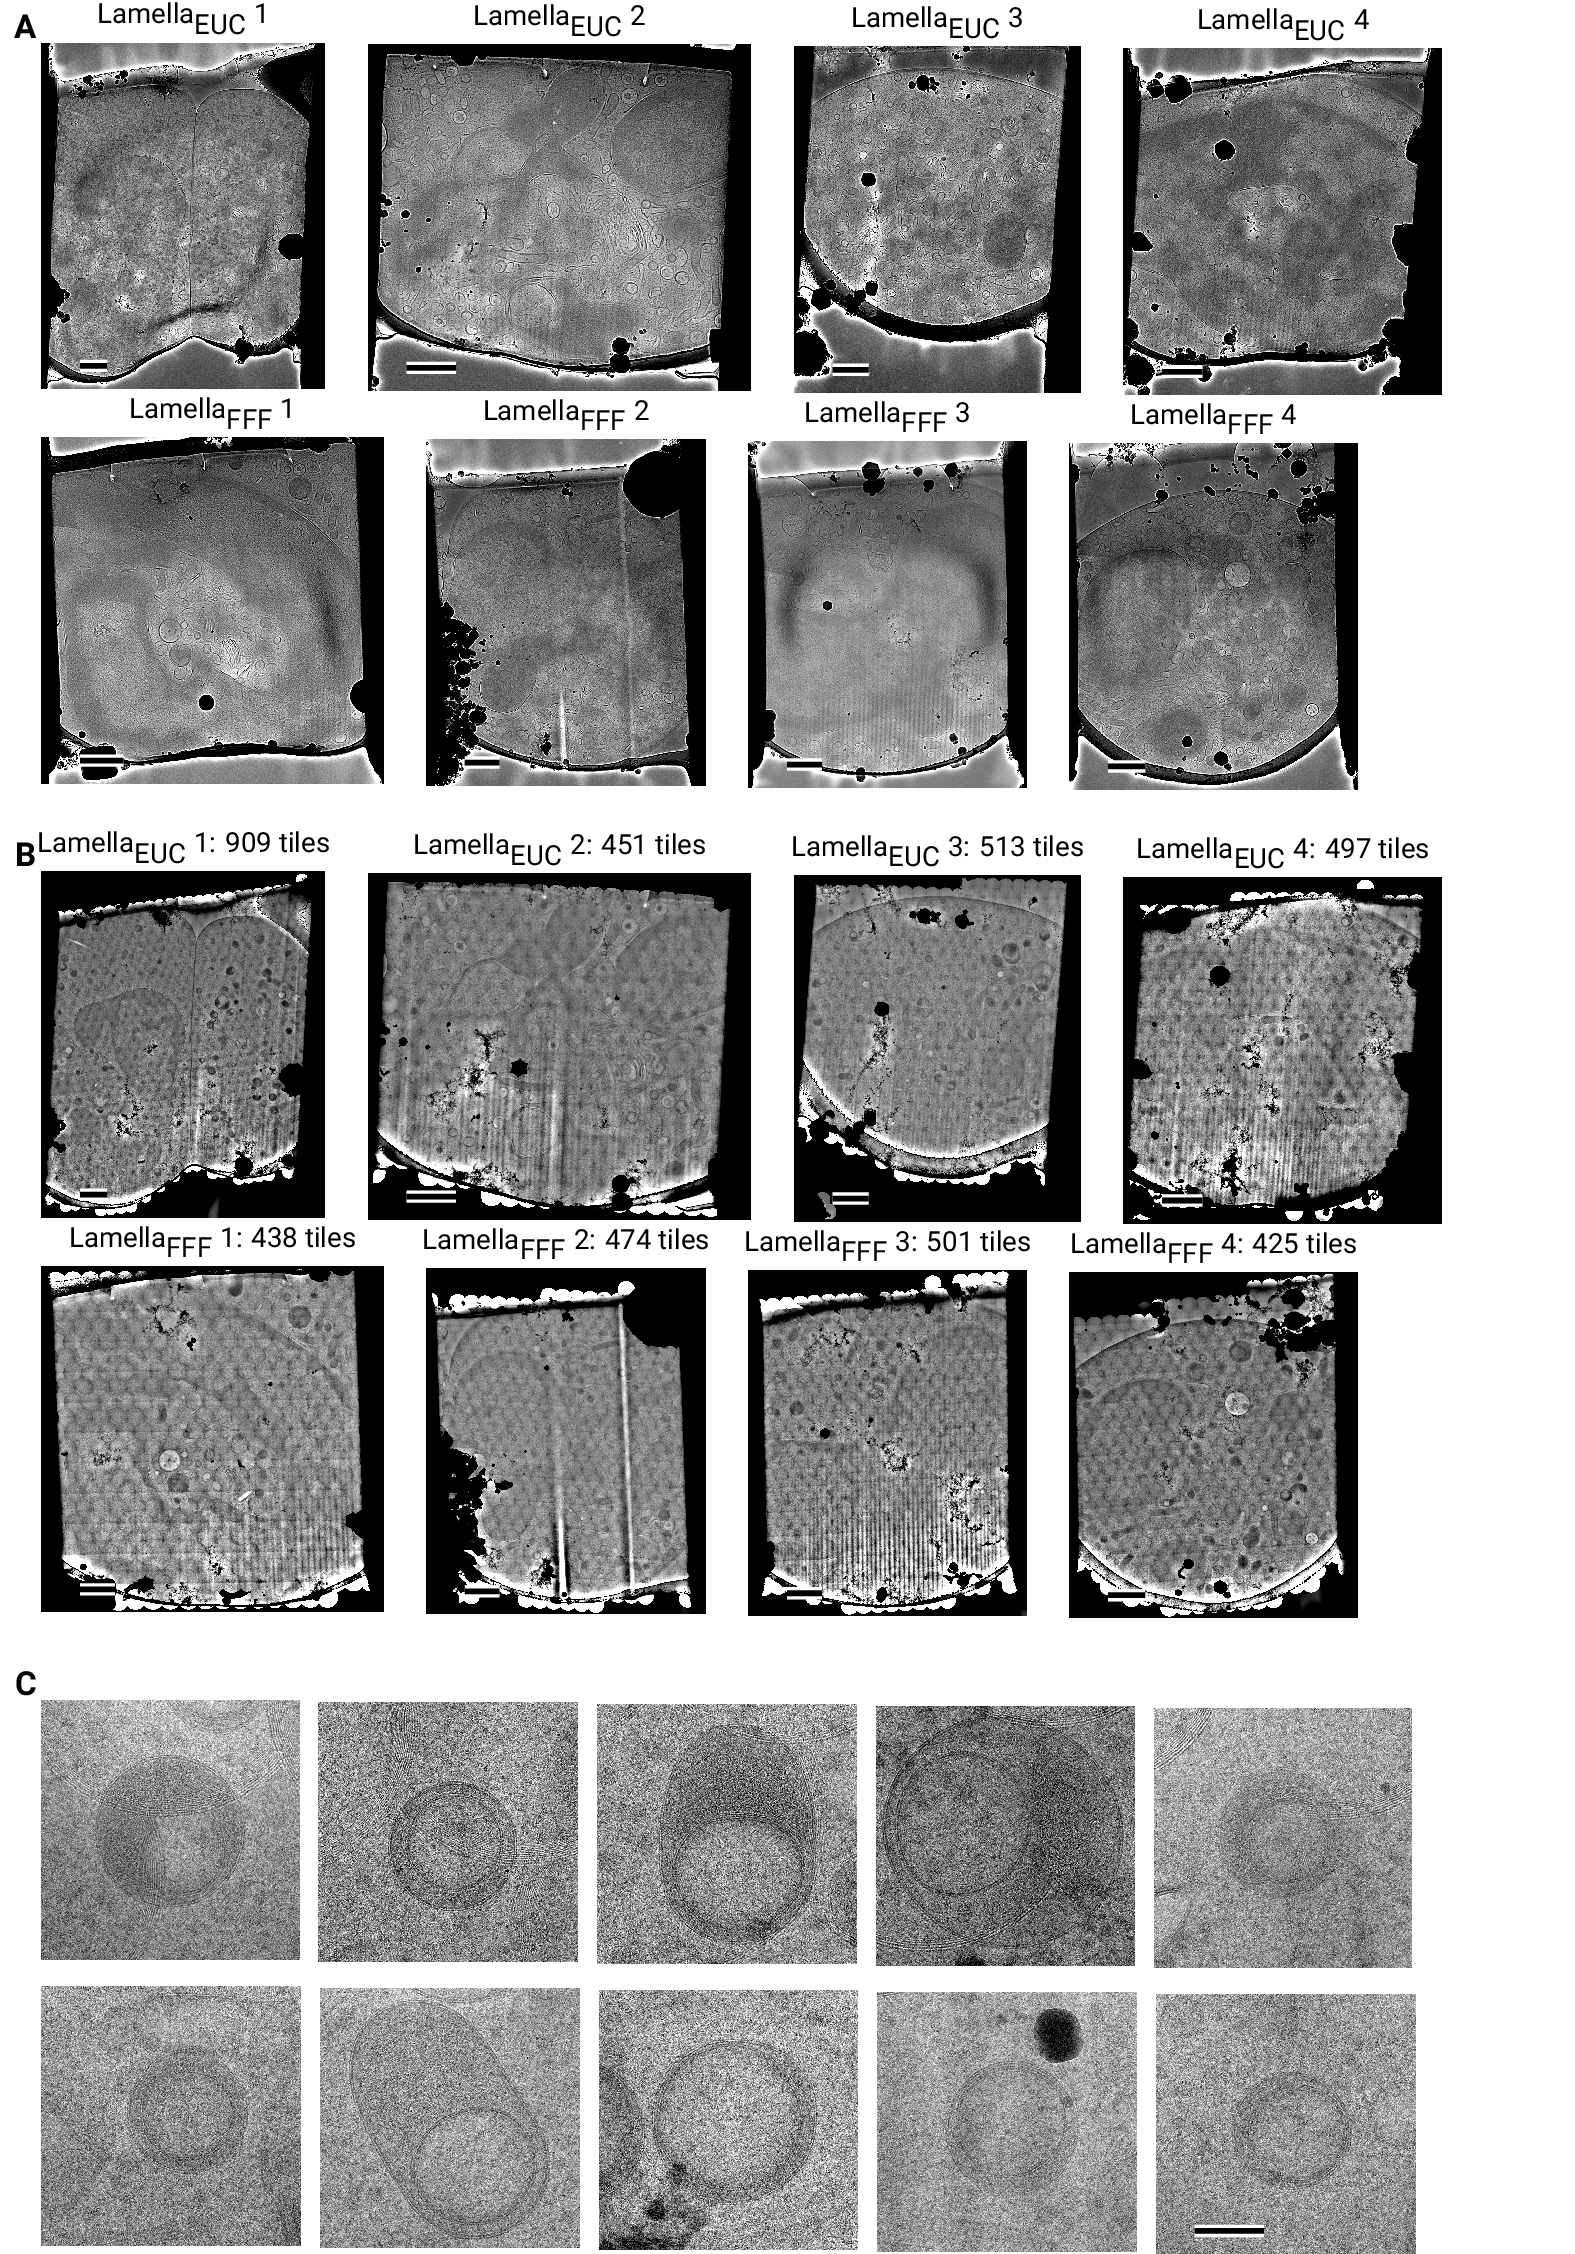 Figure 4 - figure supplement 4: Overview images of lamellae imaged using the DeCo-LACE approach taken at low-magnification (A) Overviews taken at low magnification. Scalebar corresponds to 1 μm. (B) Overviews assembled using the DeCo-LACE approach. Scalebar corresponds to 1 μm. (C) Representative examples of a class of granules containing a putatively cytosolic inclusion. Scalebar corresponds to 100 nm.